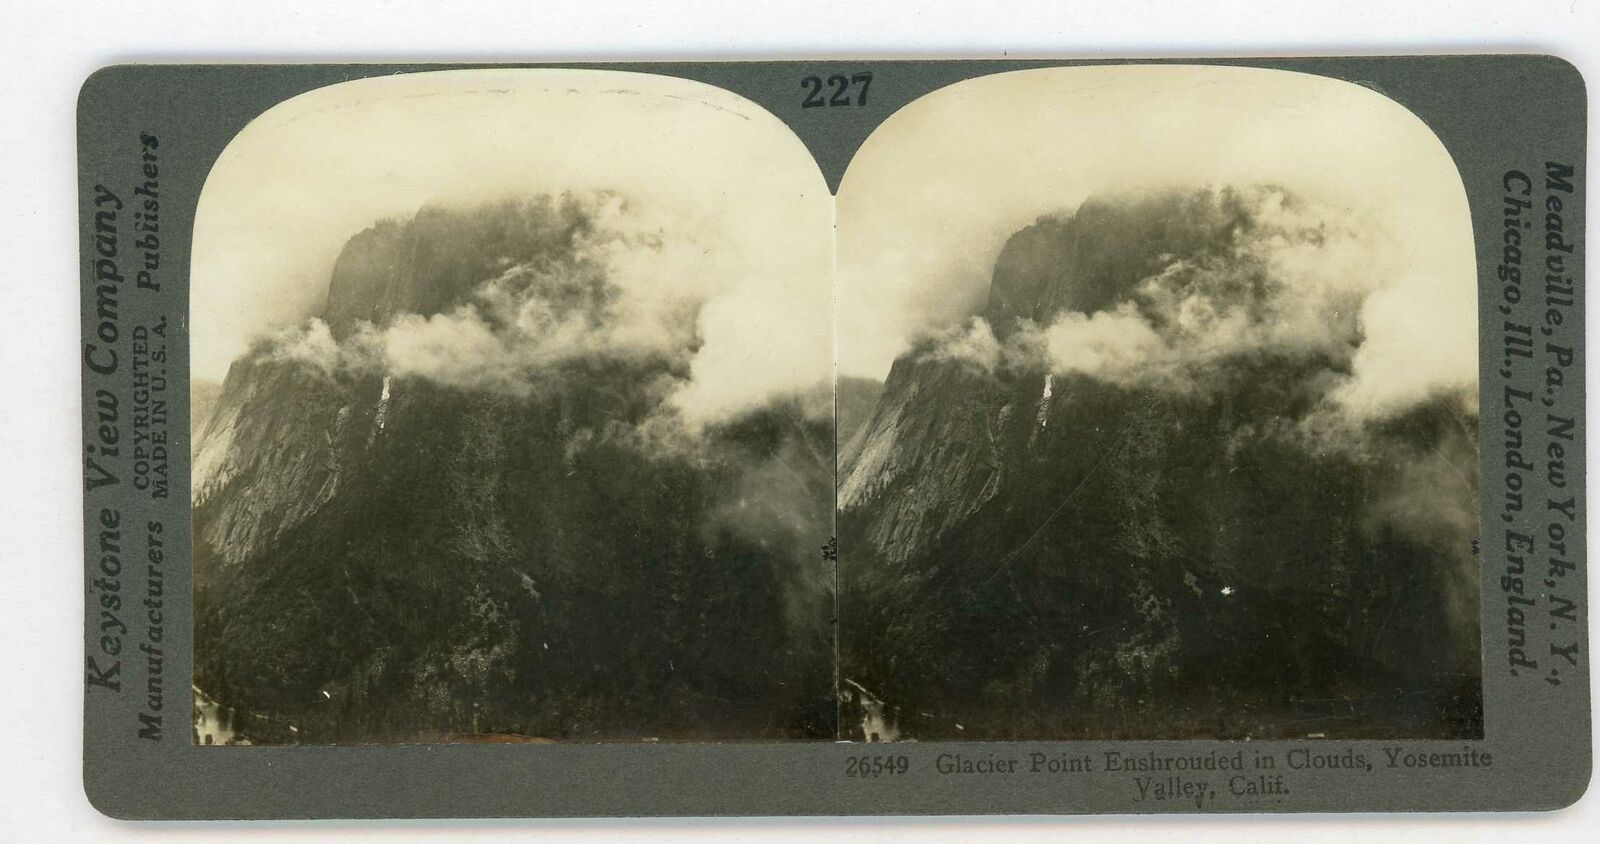 Yosemite ~ GLACIER POINT ENSHROUDED IN CLOUDS ~ Stereoview 26549 kscam227